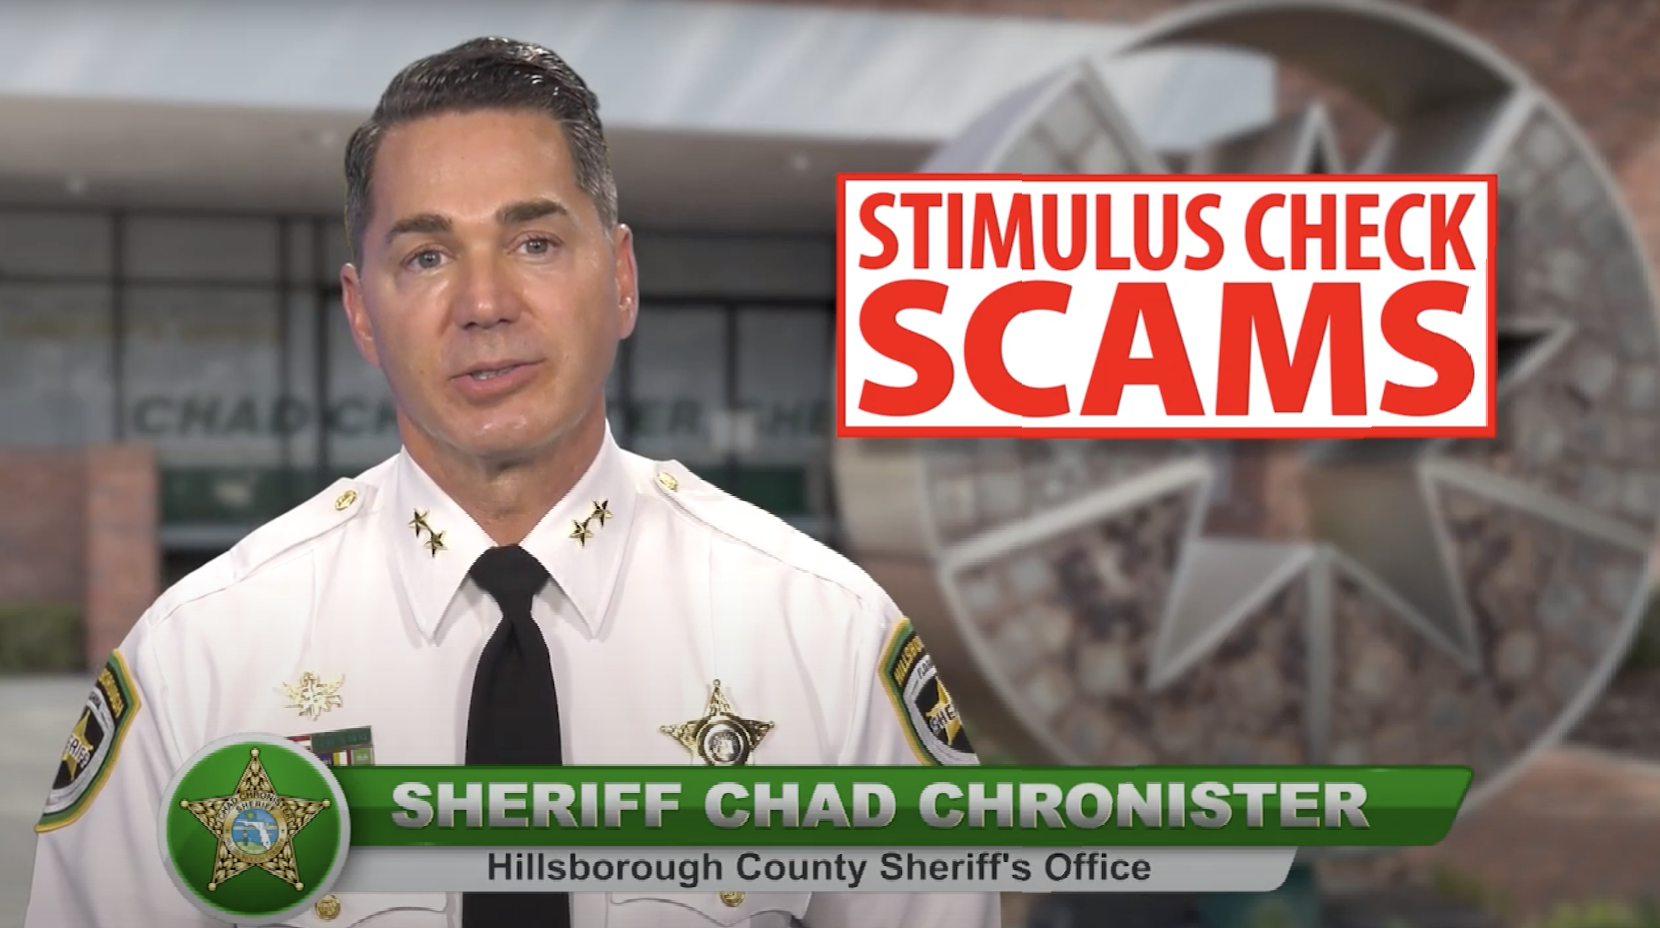 Beware of stimulus check scams